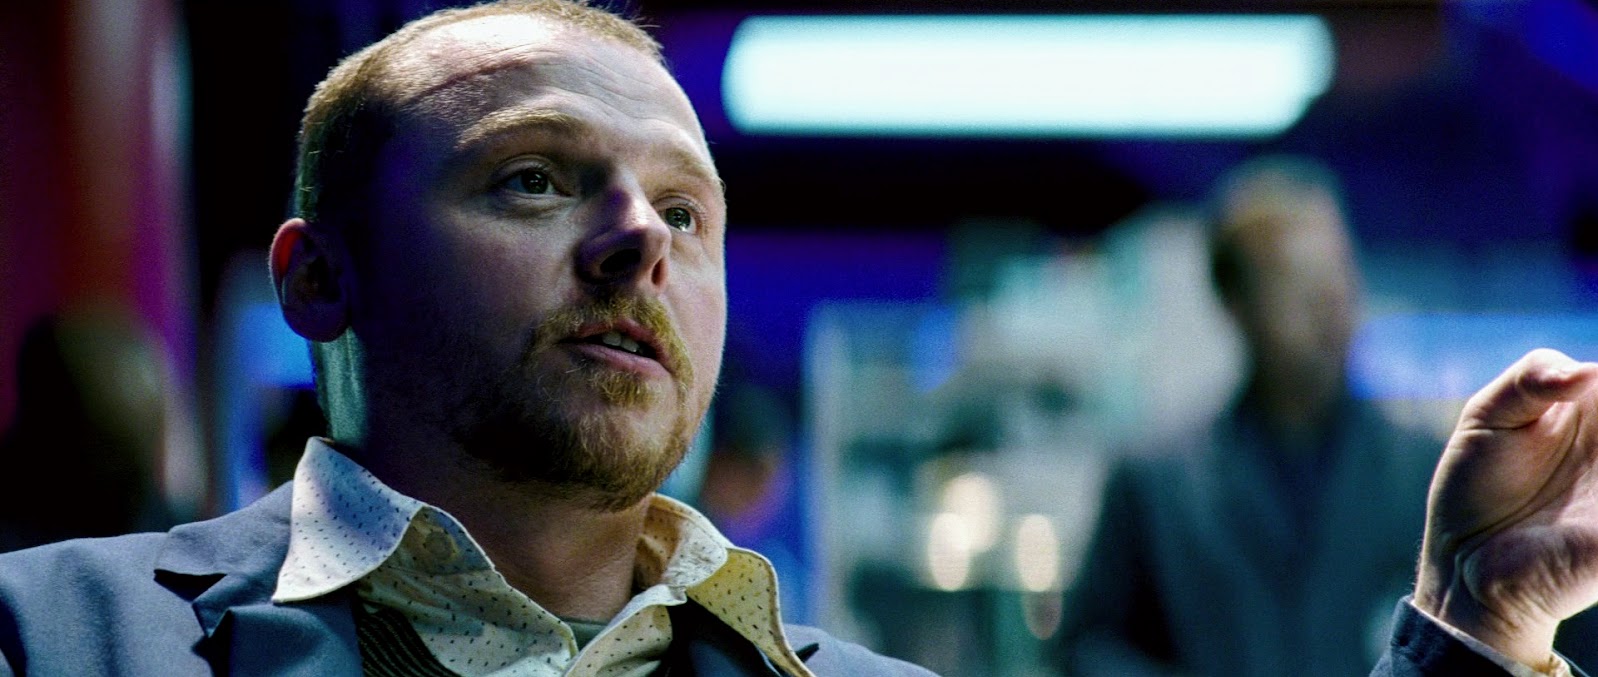 Simon Pegg Is The Man Heres Just A Look At His Film Work By Scotch.